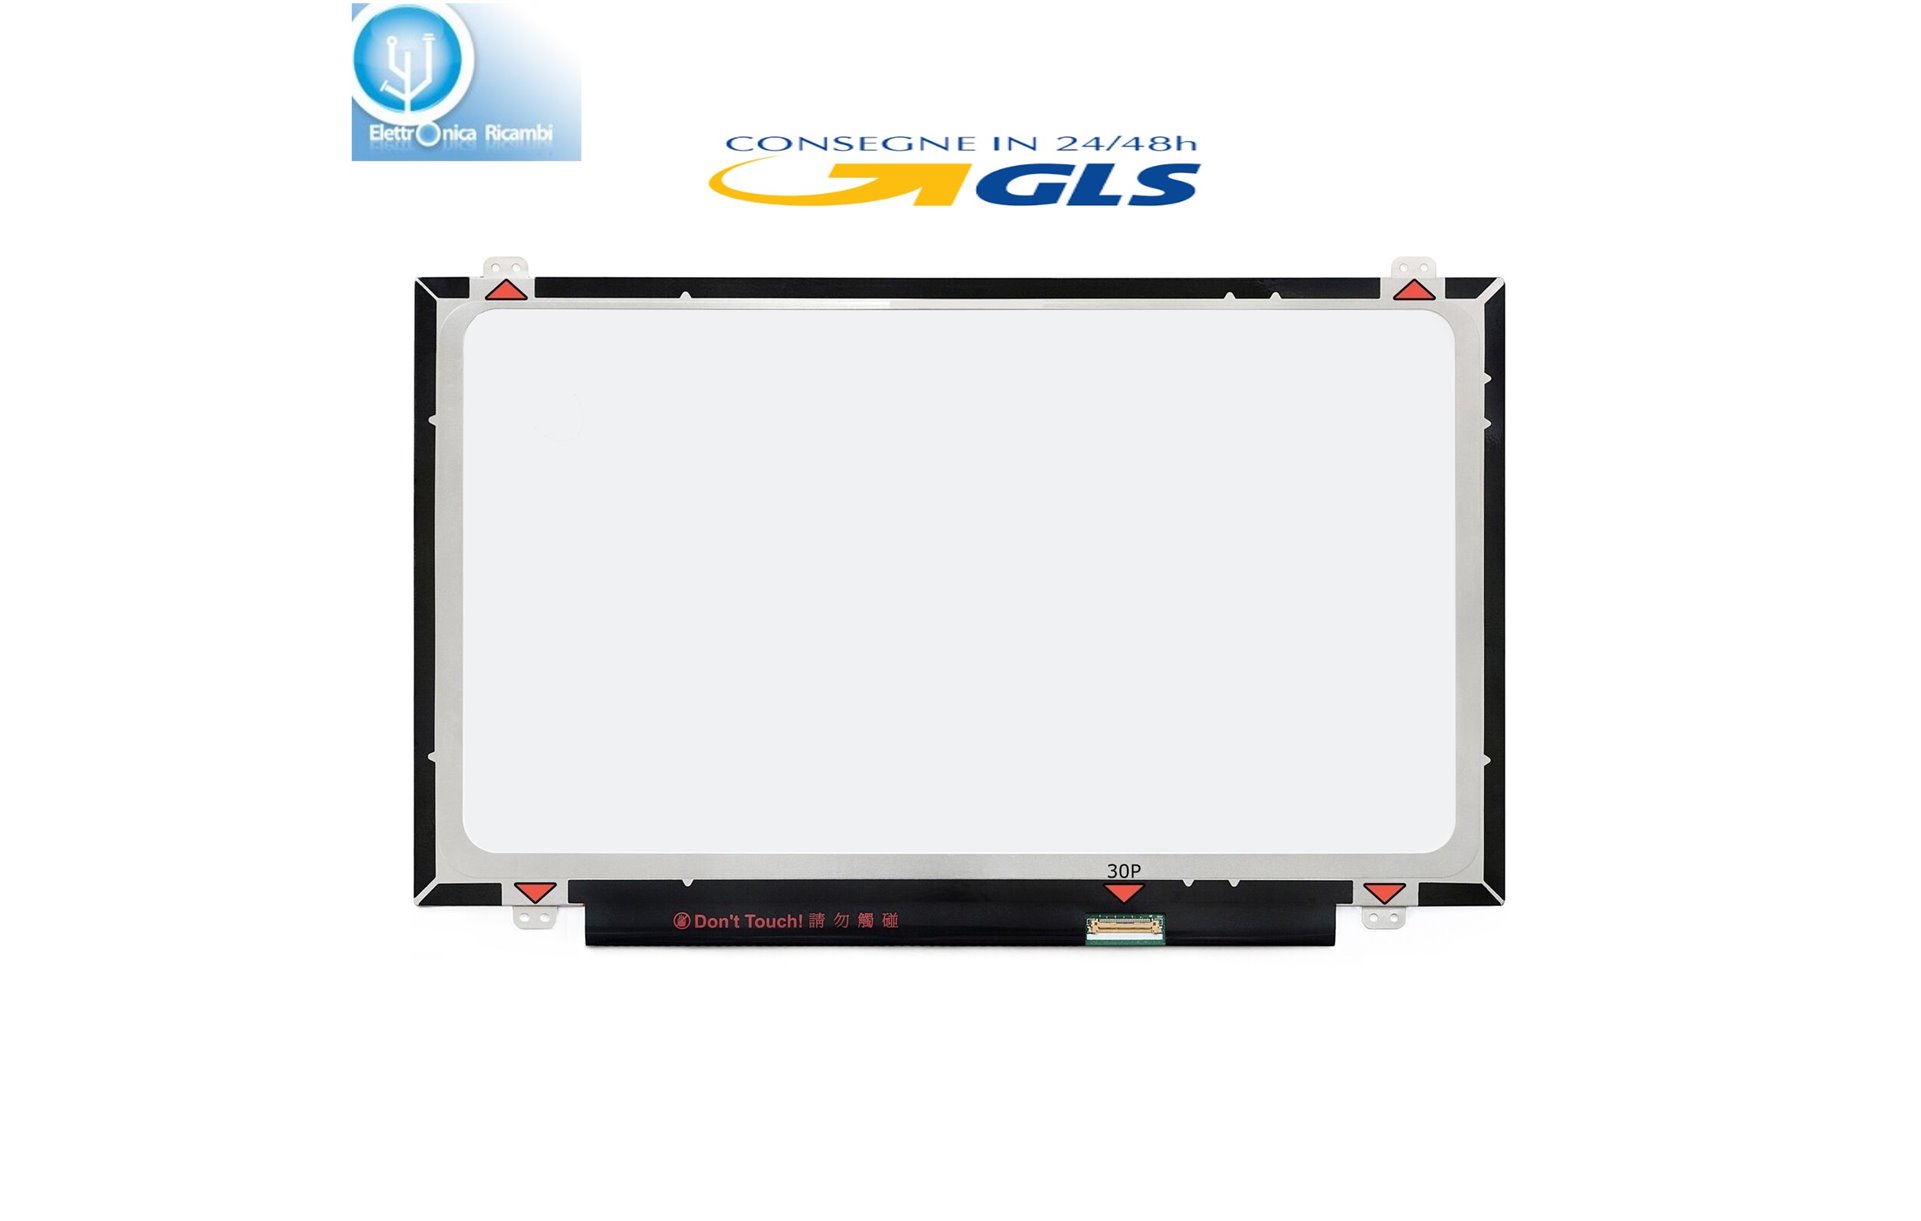 Display LCD Schermo Acer ASPIRE E5-471 SERIES 14.0 LED 30 pin 1366x768